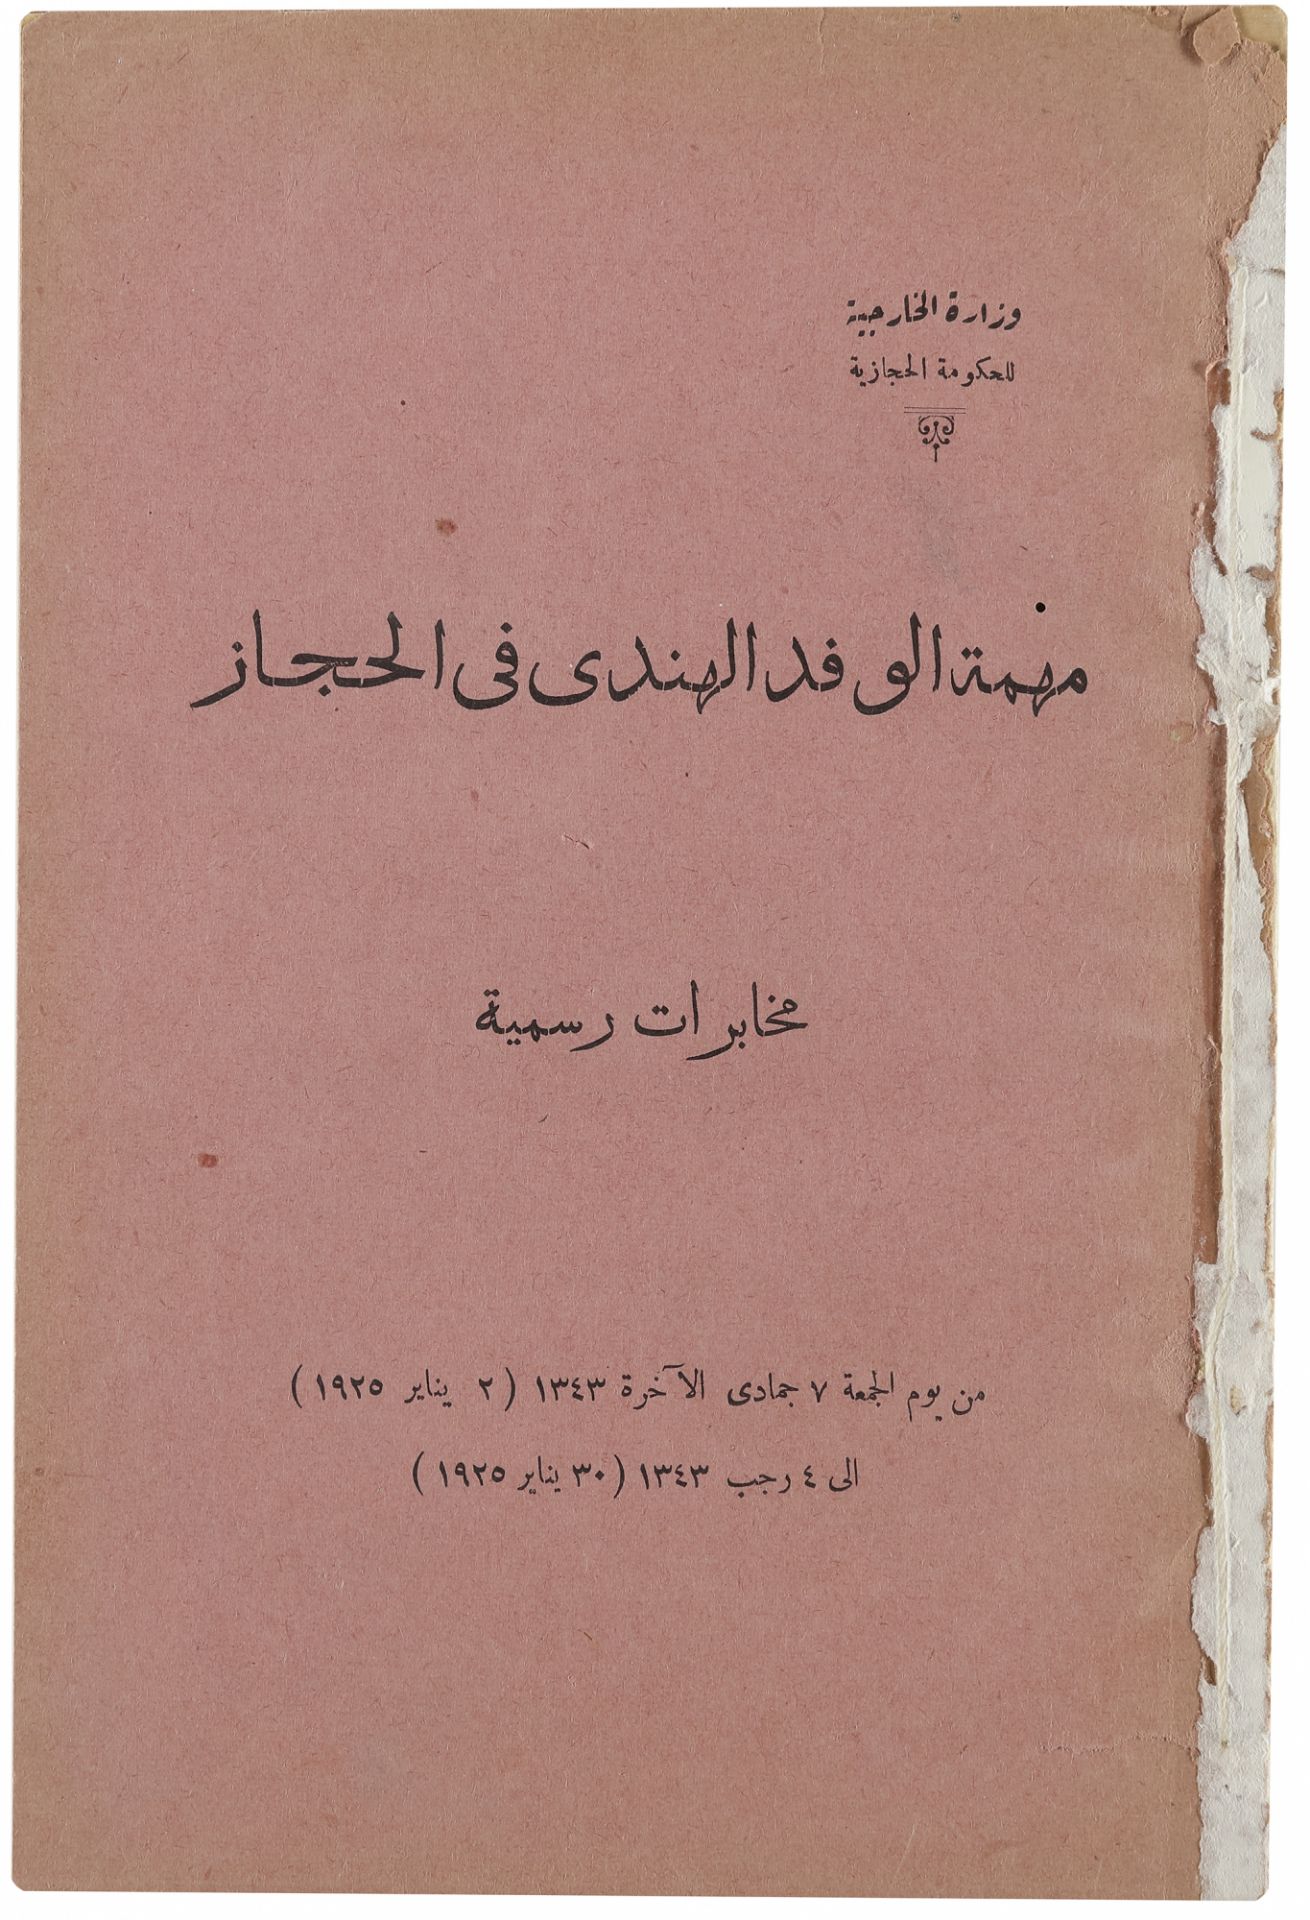 AN IMPORTANT BOOK ‘THE INDIAN DELEGATION’S MISSION IN HIJAZ’ DURING THEIR VISIT TO HIJAZ BETWEEN 7TH